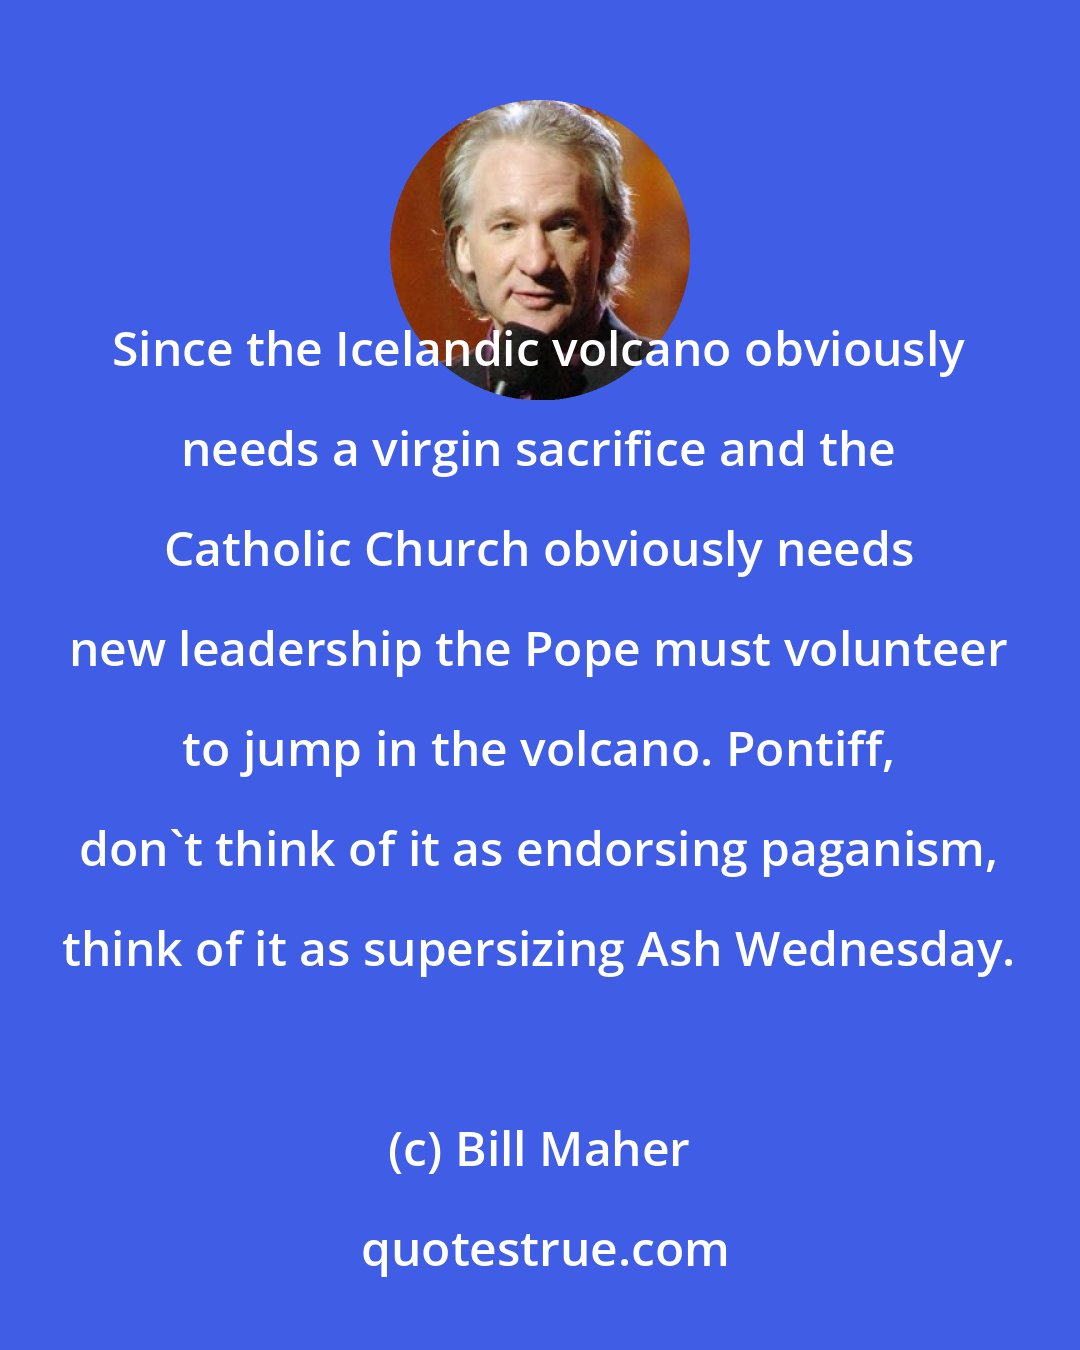 Bill Maher: Since the Icelandic volcano obviously needs a virgin sacrifice and the Catholic Church obviously needs new leadership the Pope must volunteer to jump in the volcano. Pontiff, don't think of it as endorsing paganism, think of it as supersizing Ash Wednesday.